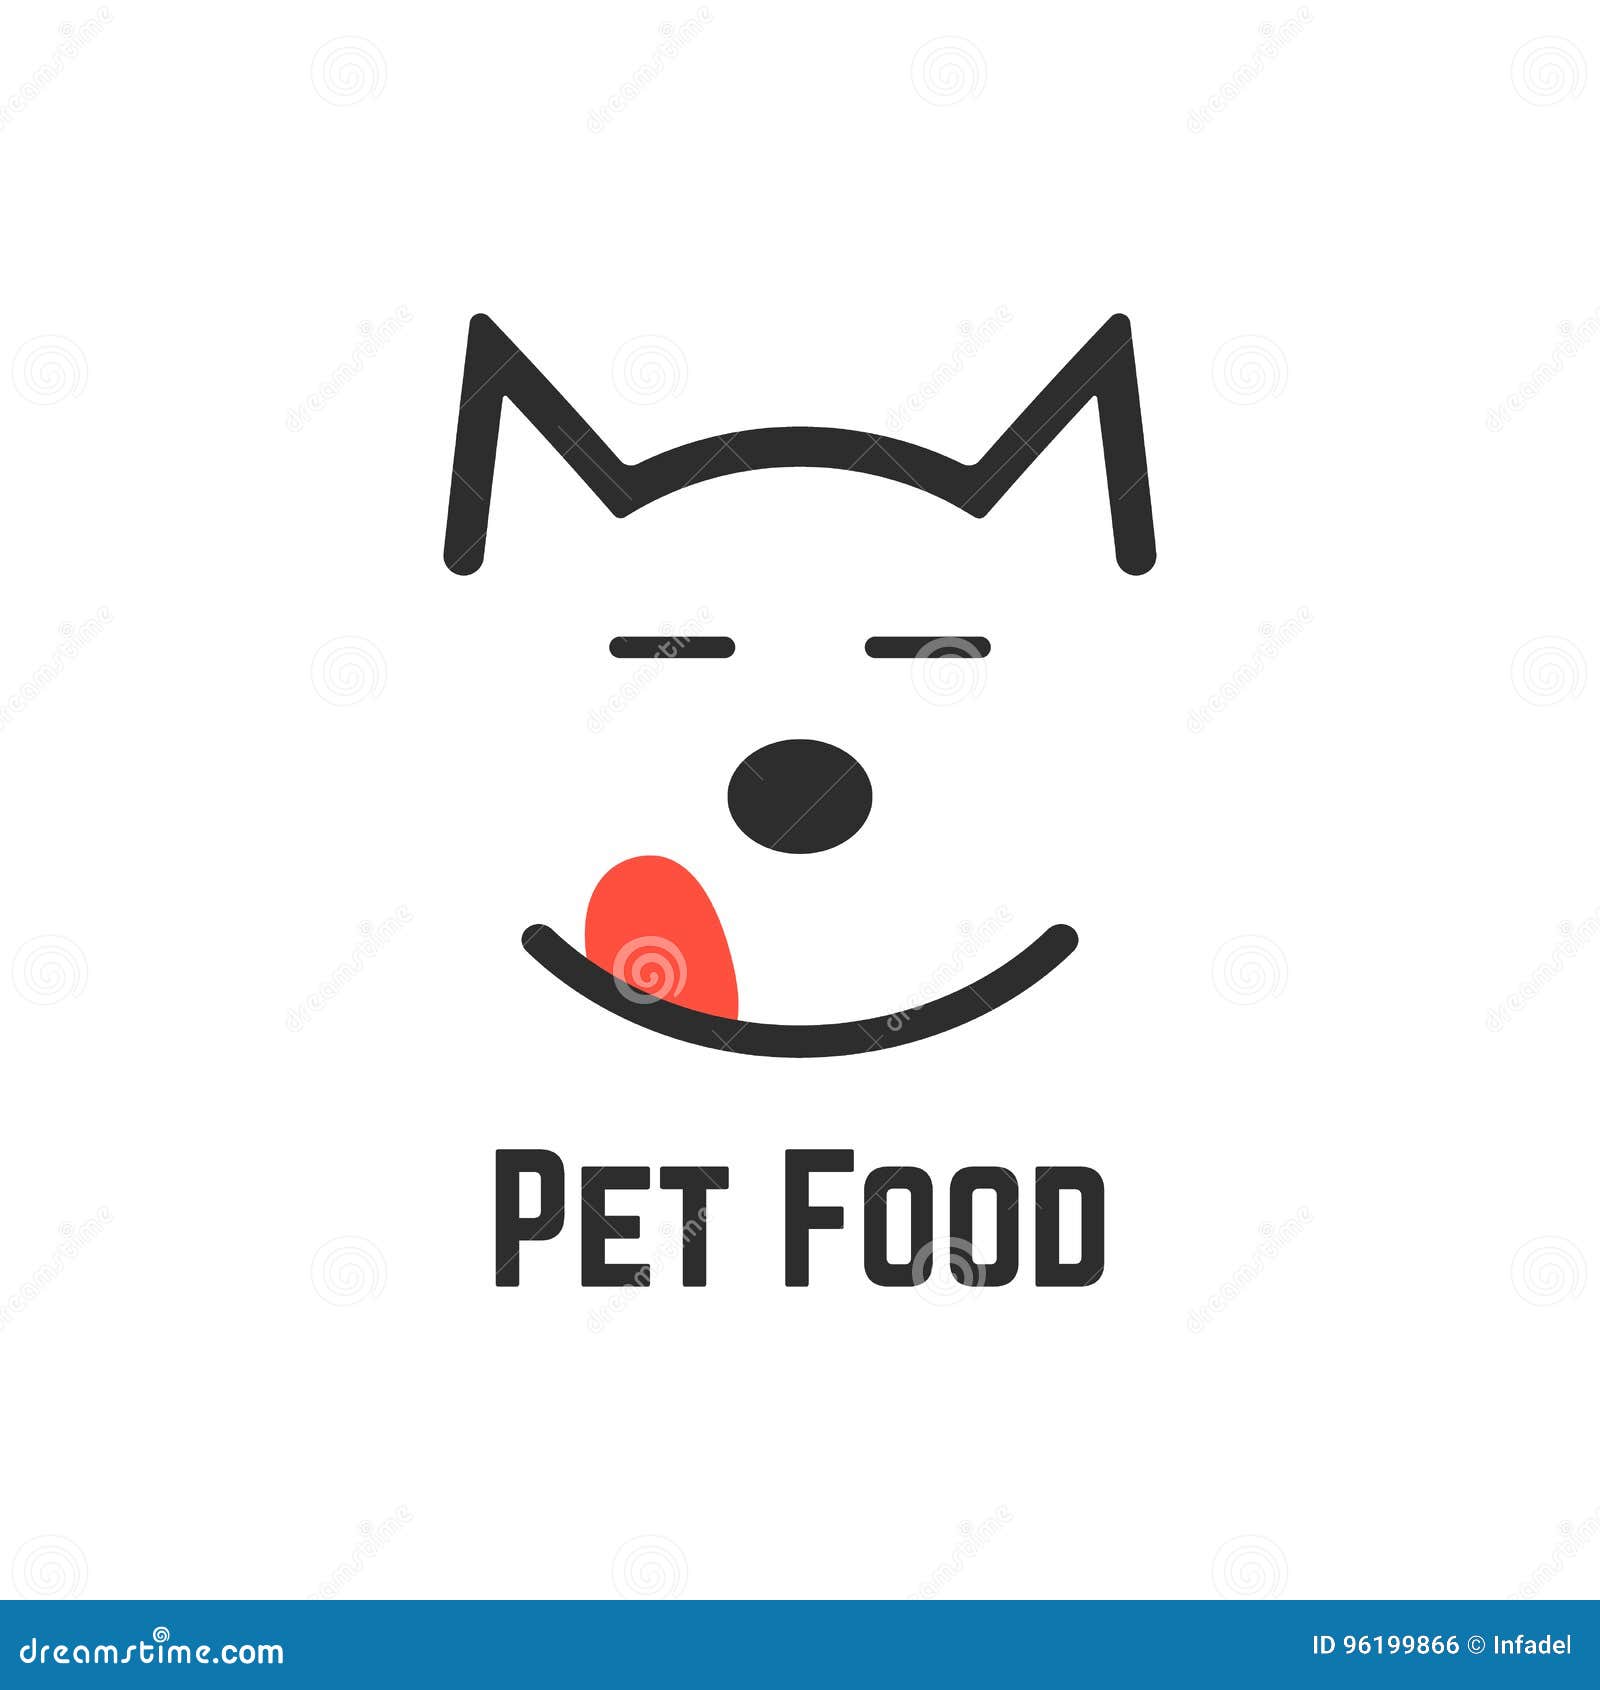 https://thumbs.dreamstime.com/z/pet-food-logo-dog-icon-concept-veterinary-visual-identity-vet-forage-wildlife-store-feed-white-background-flat-96199866.jpg